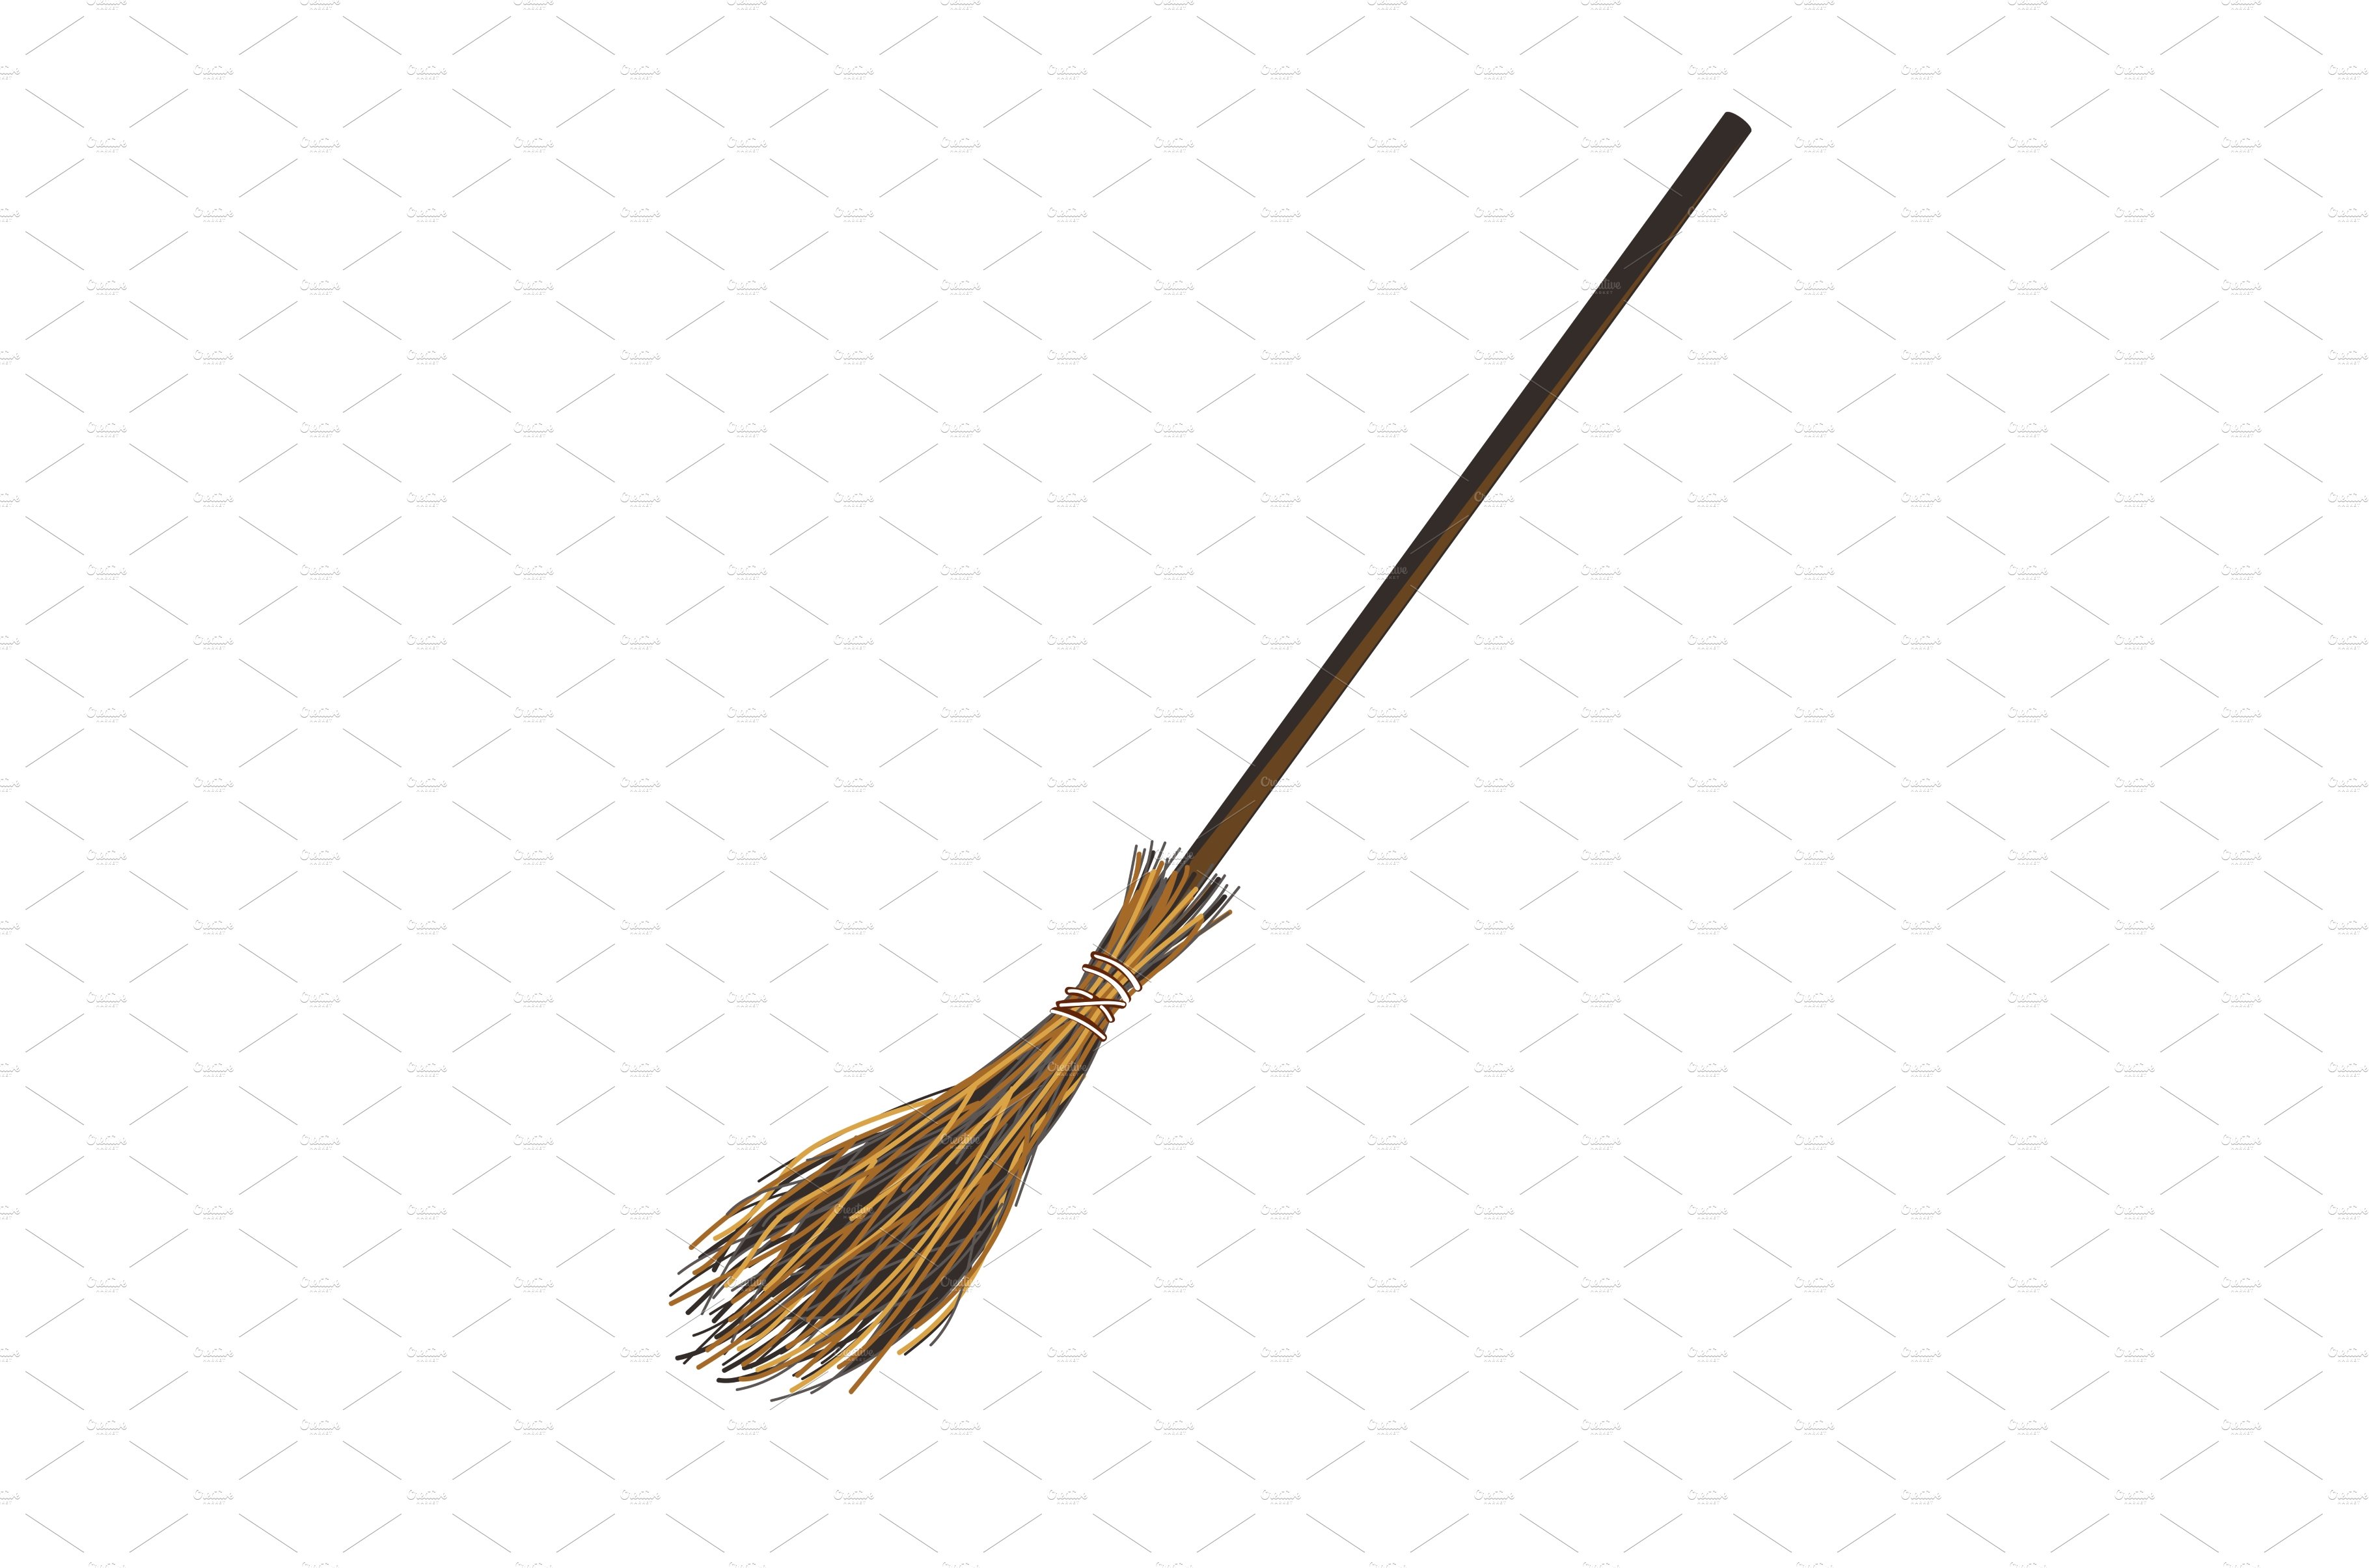 Magic broom on which witch flies cover image.